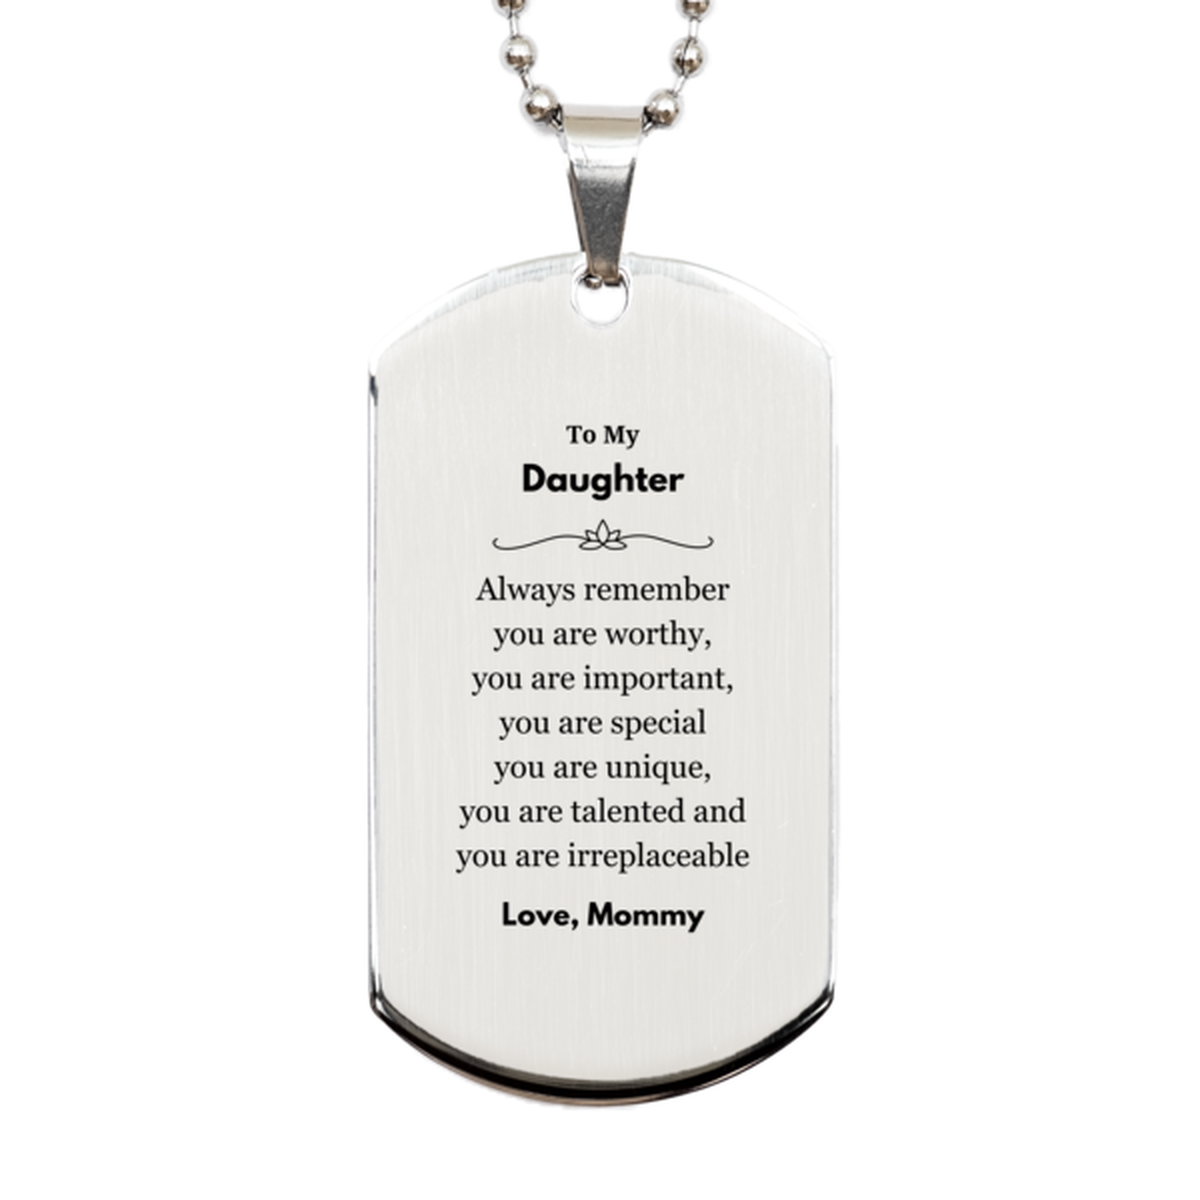 Daughter Birthday Gifts from Mommy, Inspirational Silver Dog Tag for Daughter Christmas Graduation Gifts for Daughter Always remember you are worthy, you are important. Love, Mommy